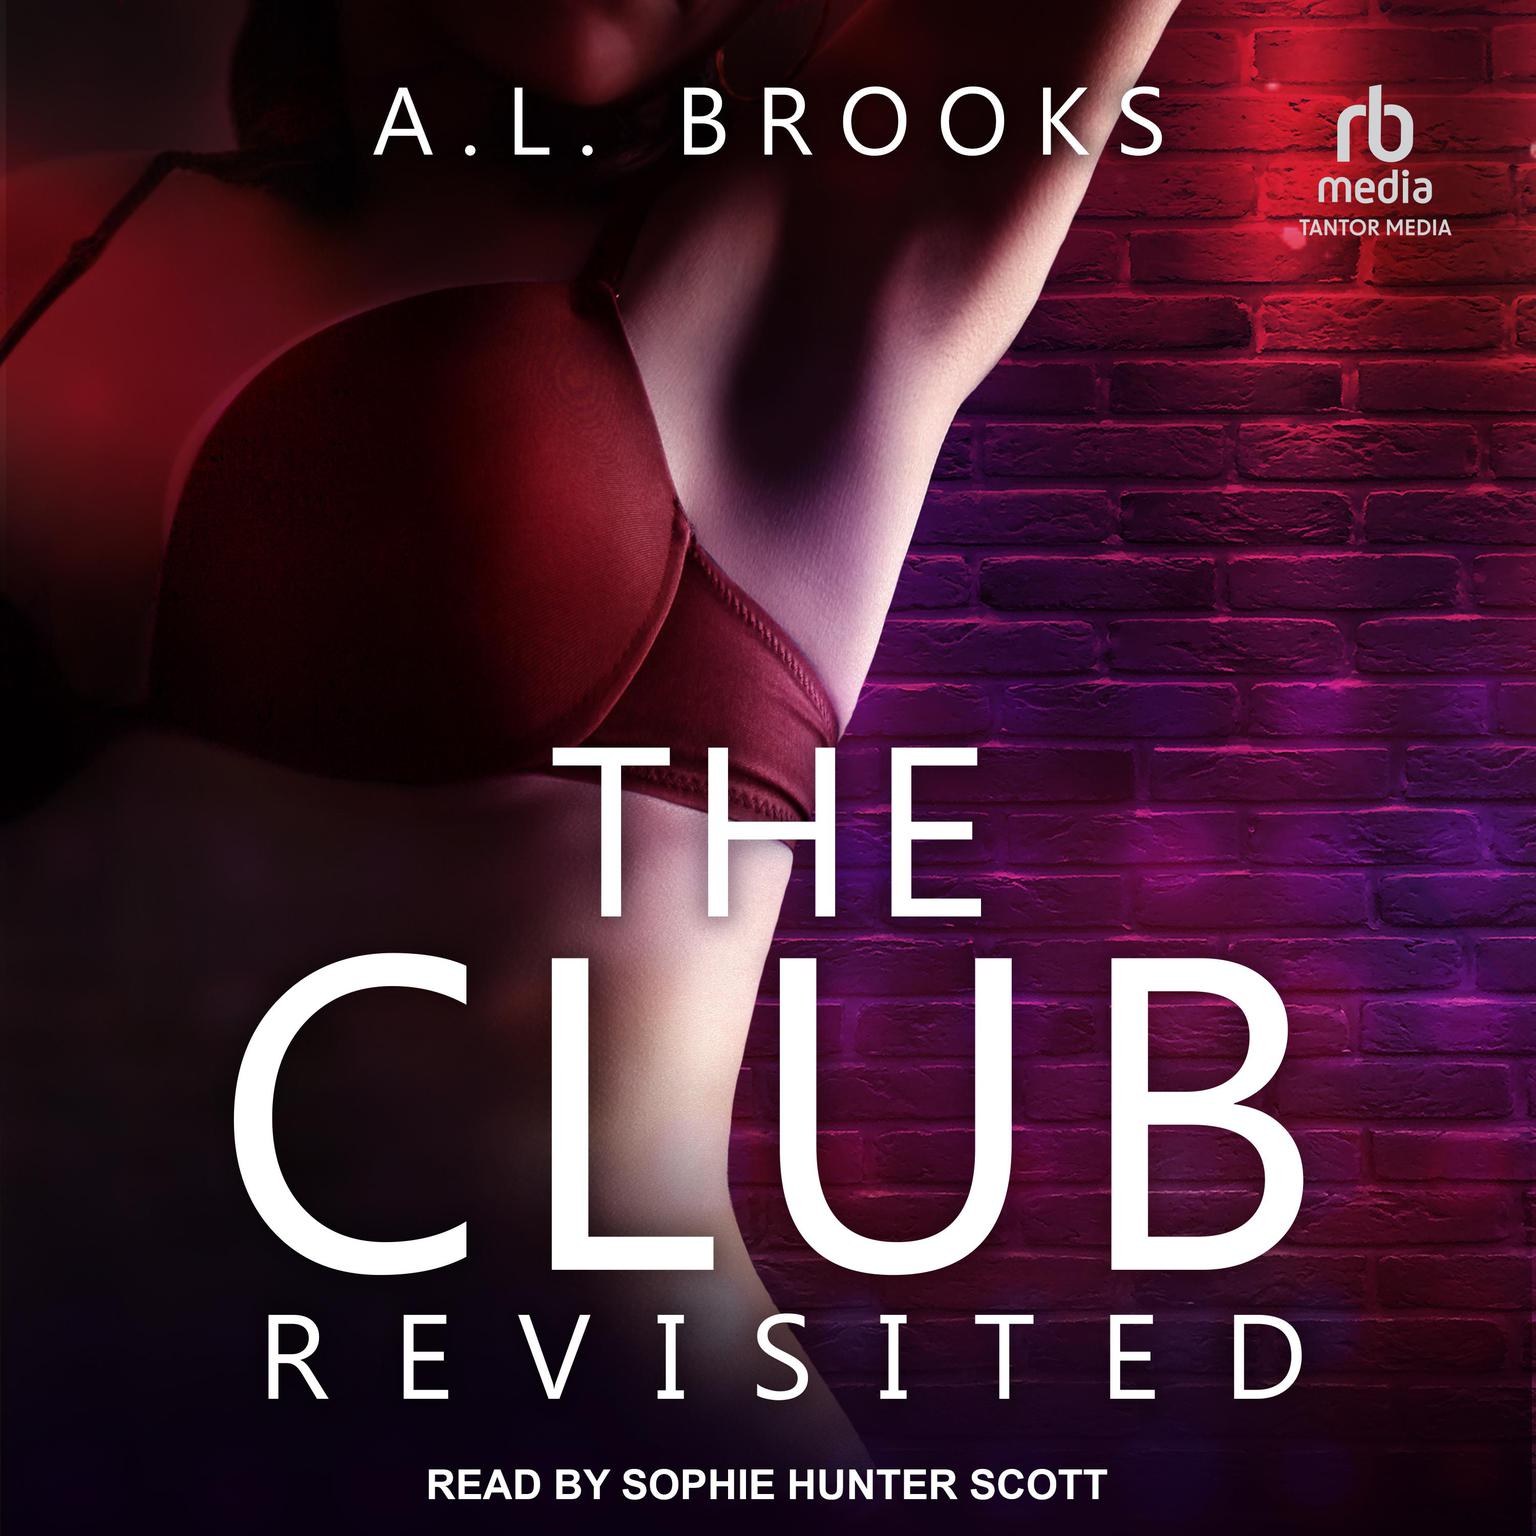 Sophie Hunter Scott, A.L. Brooks: The Club Revisited (AudiobookFormat, 2022, Tantor Audio)